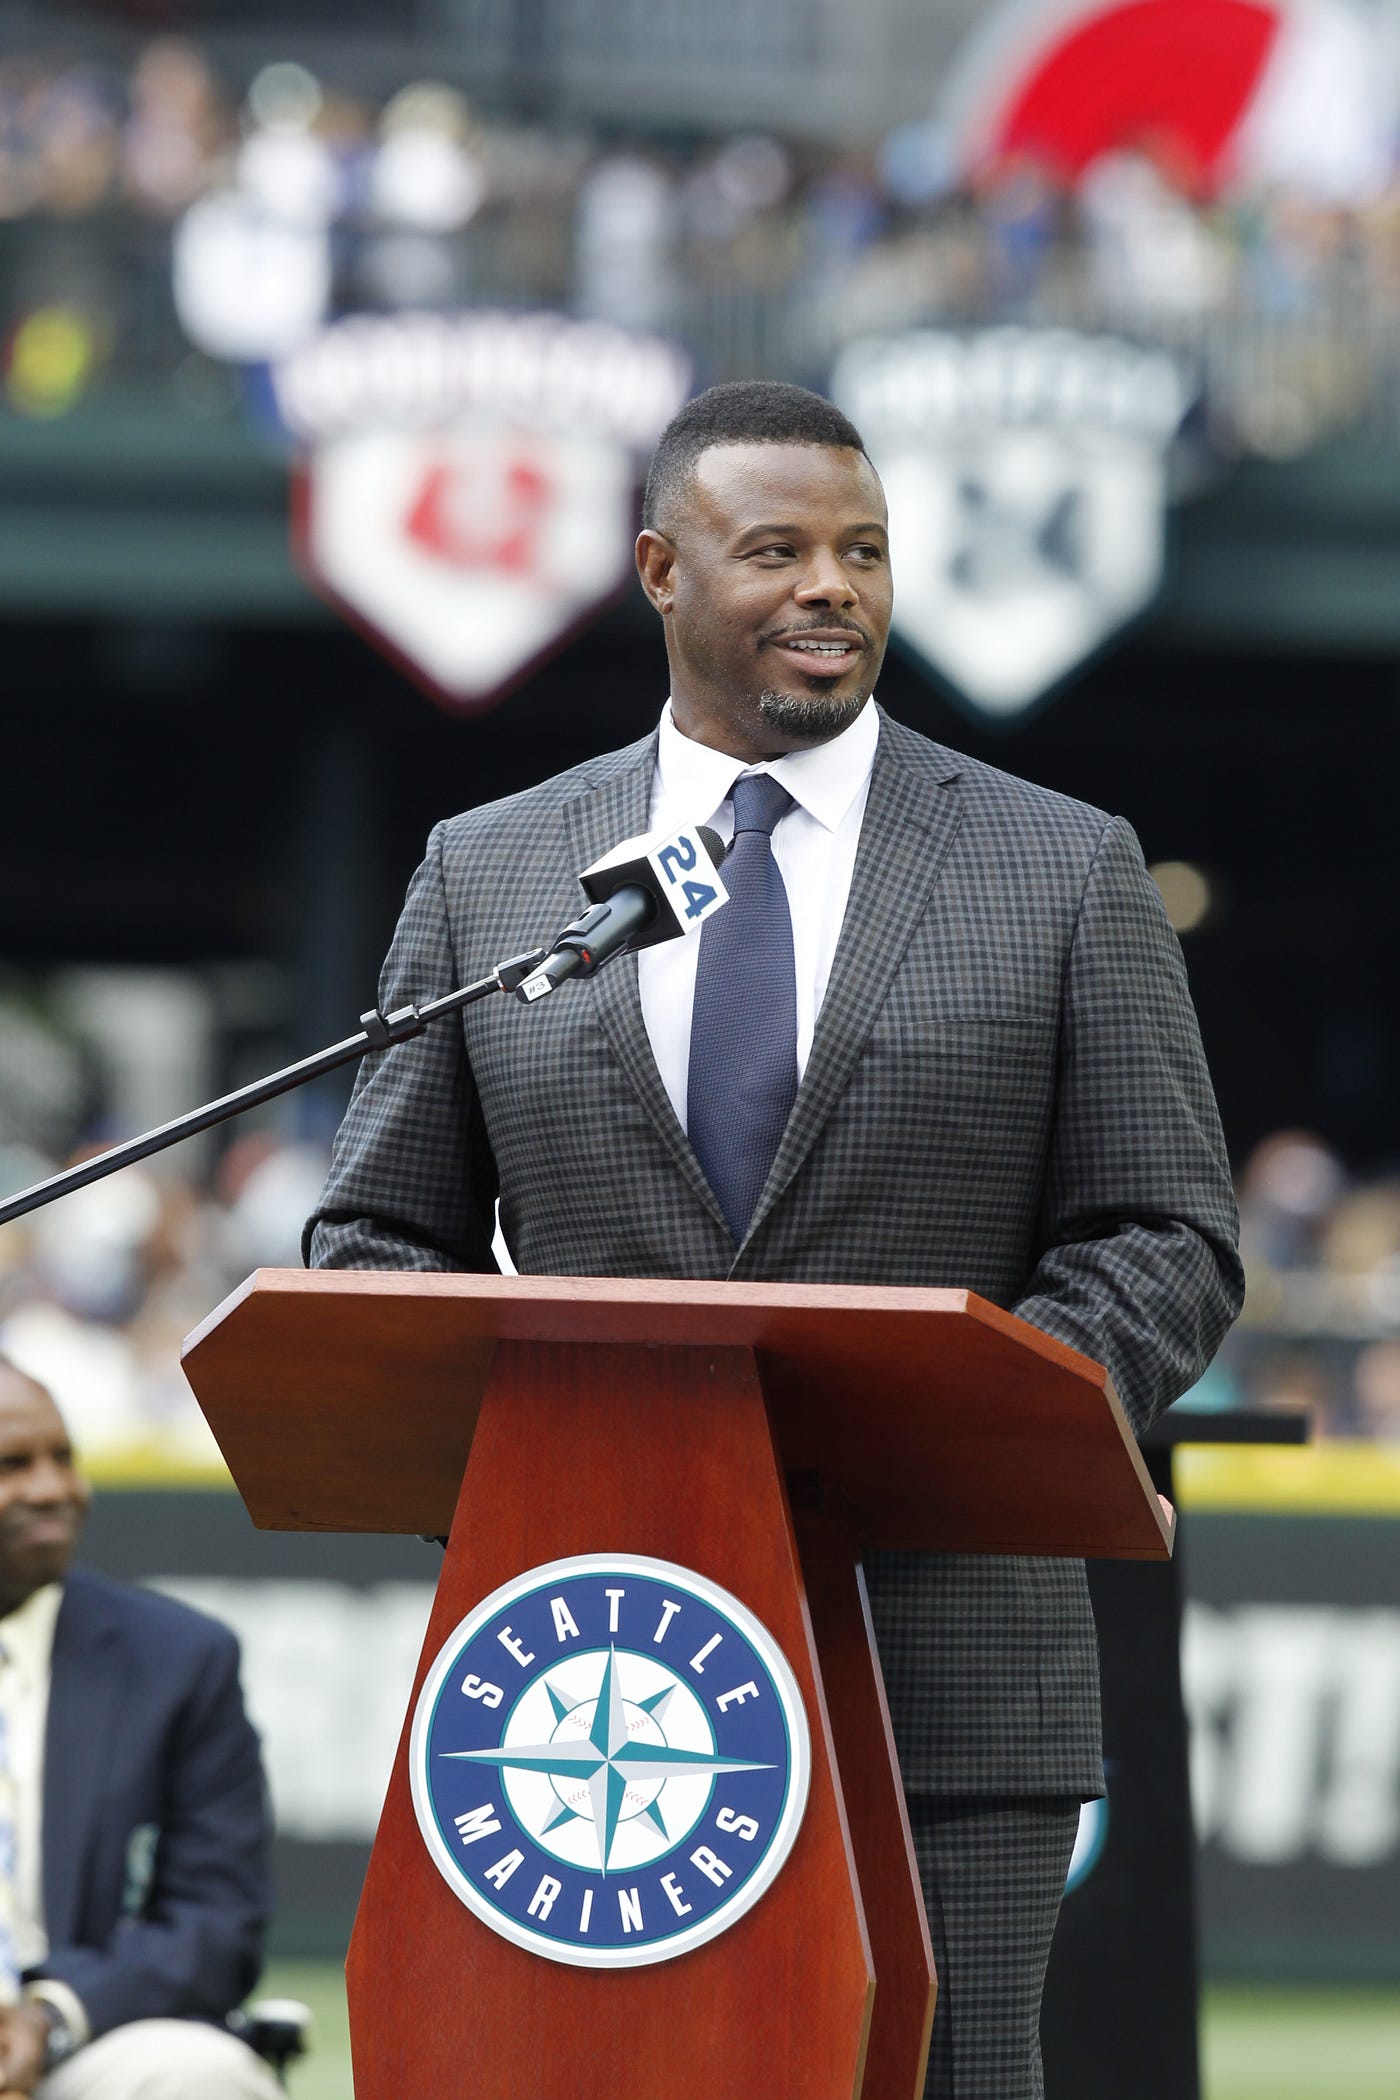 Ken Griffey Jr. Joins Seattle Mariners Partnership Group, by Mariners PR